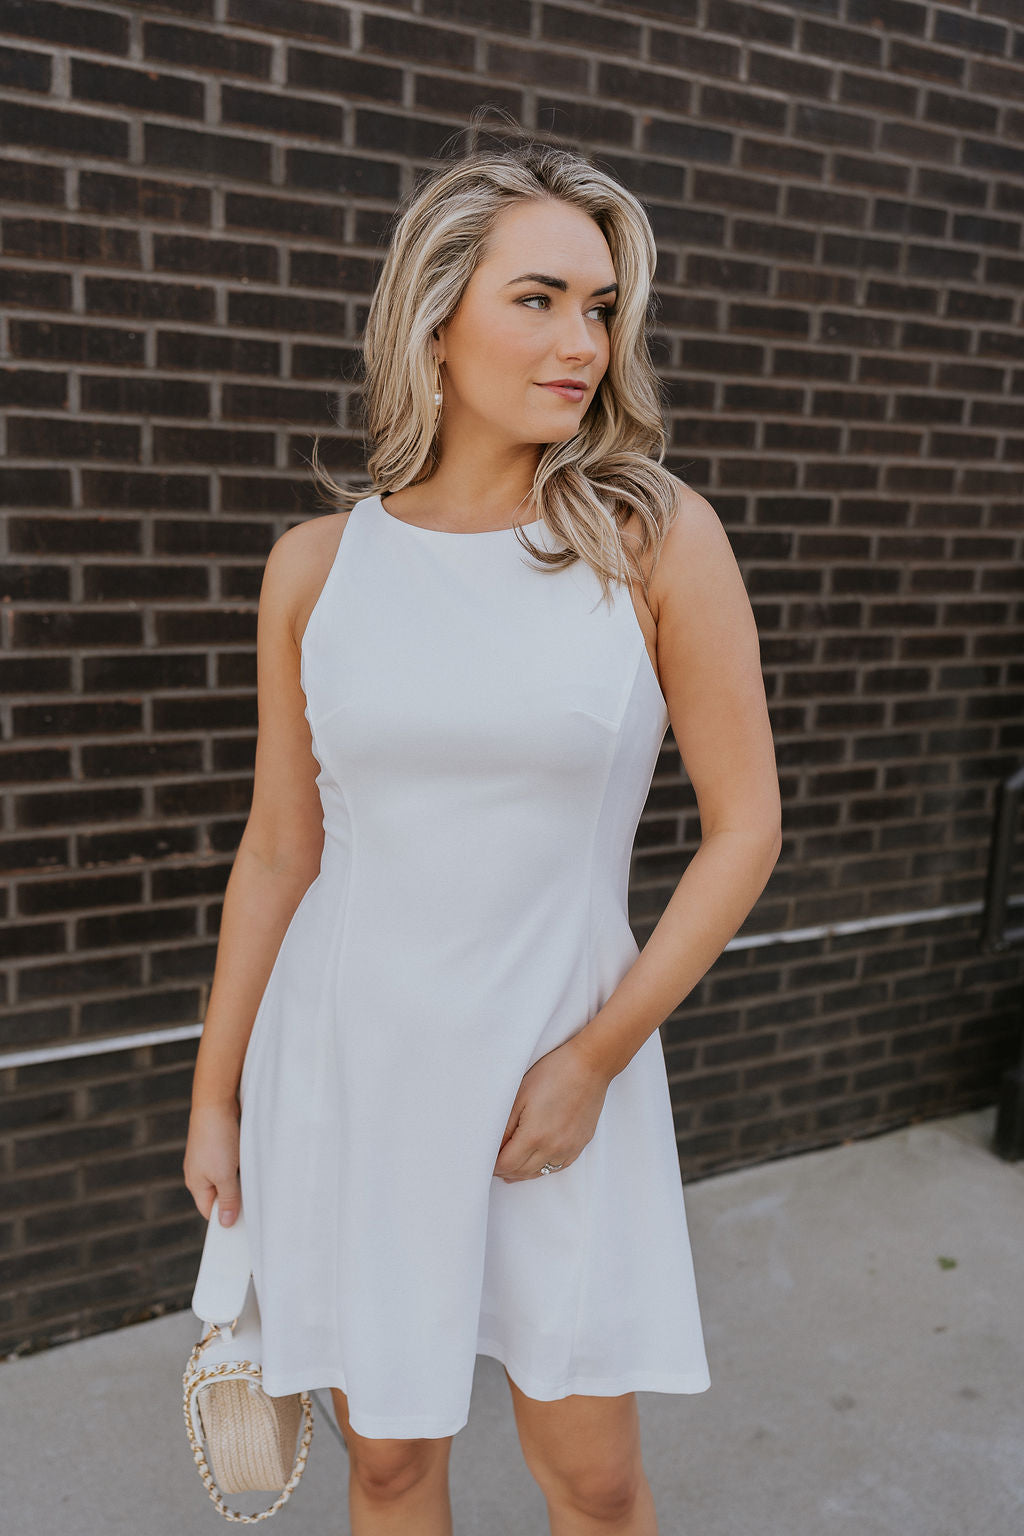 Front view of female model wearing the Catherine White Sleeveless Mini Dress that has a high round neck, sleeveless body, and flared mini silouette.